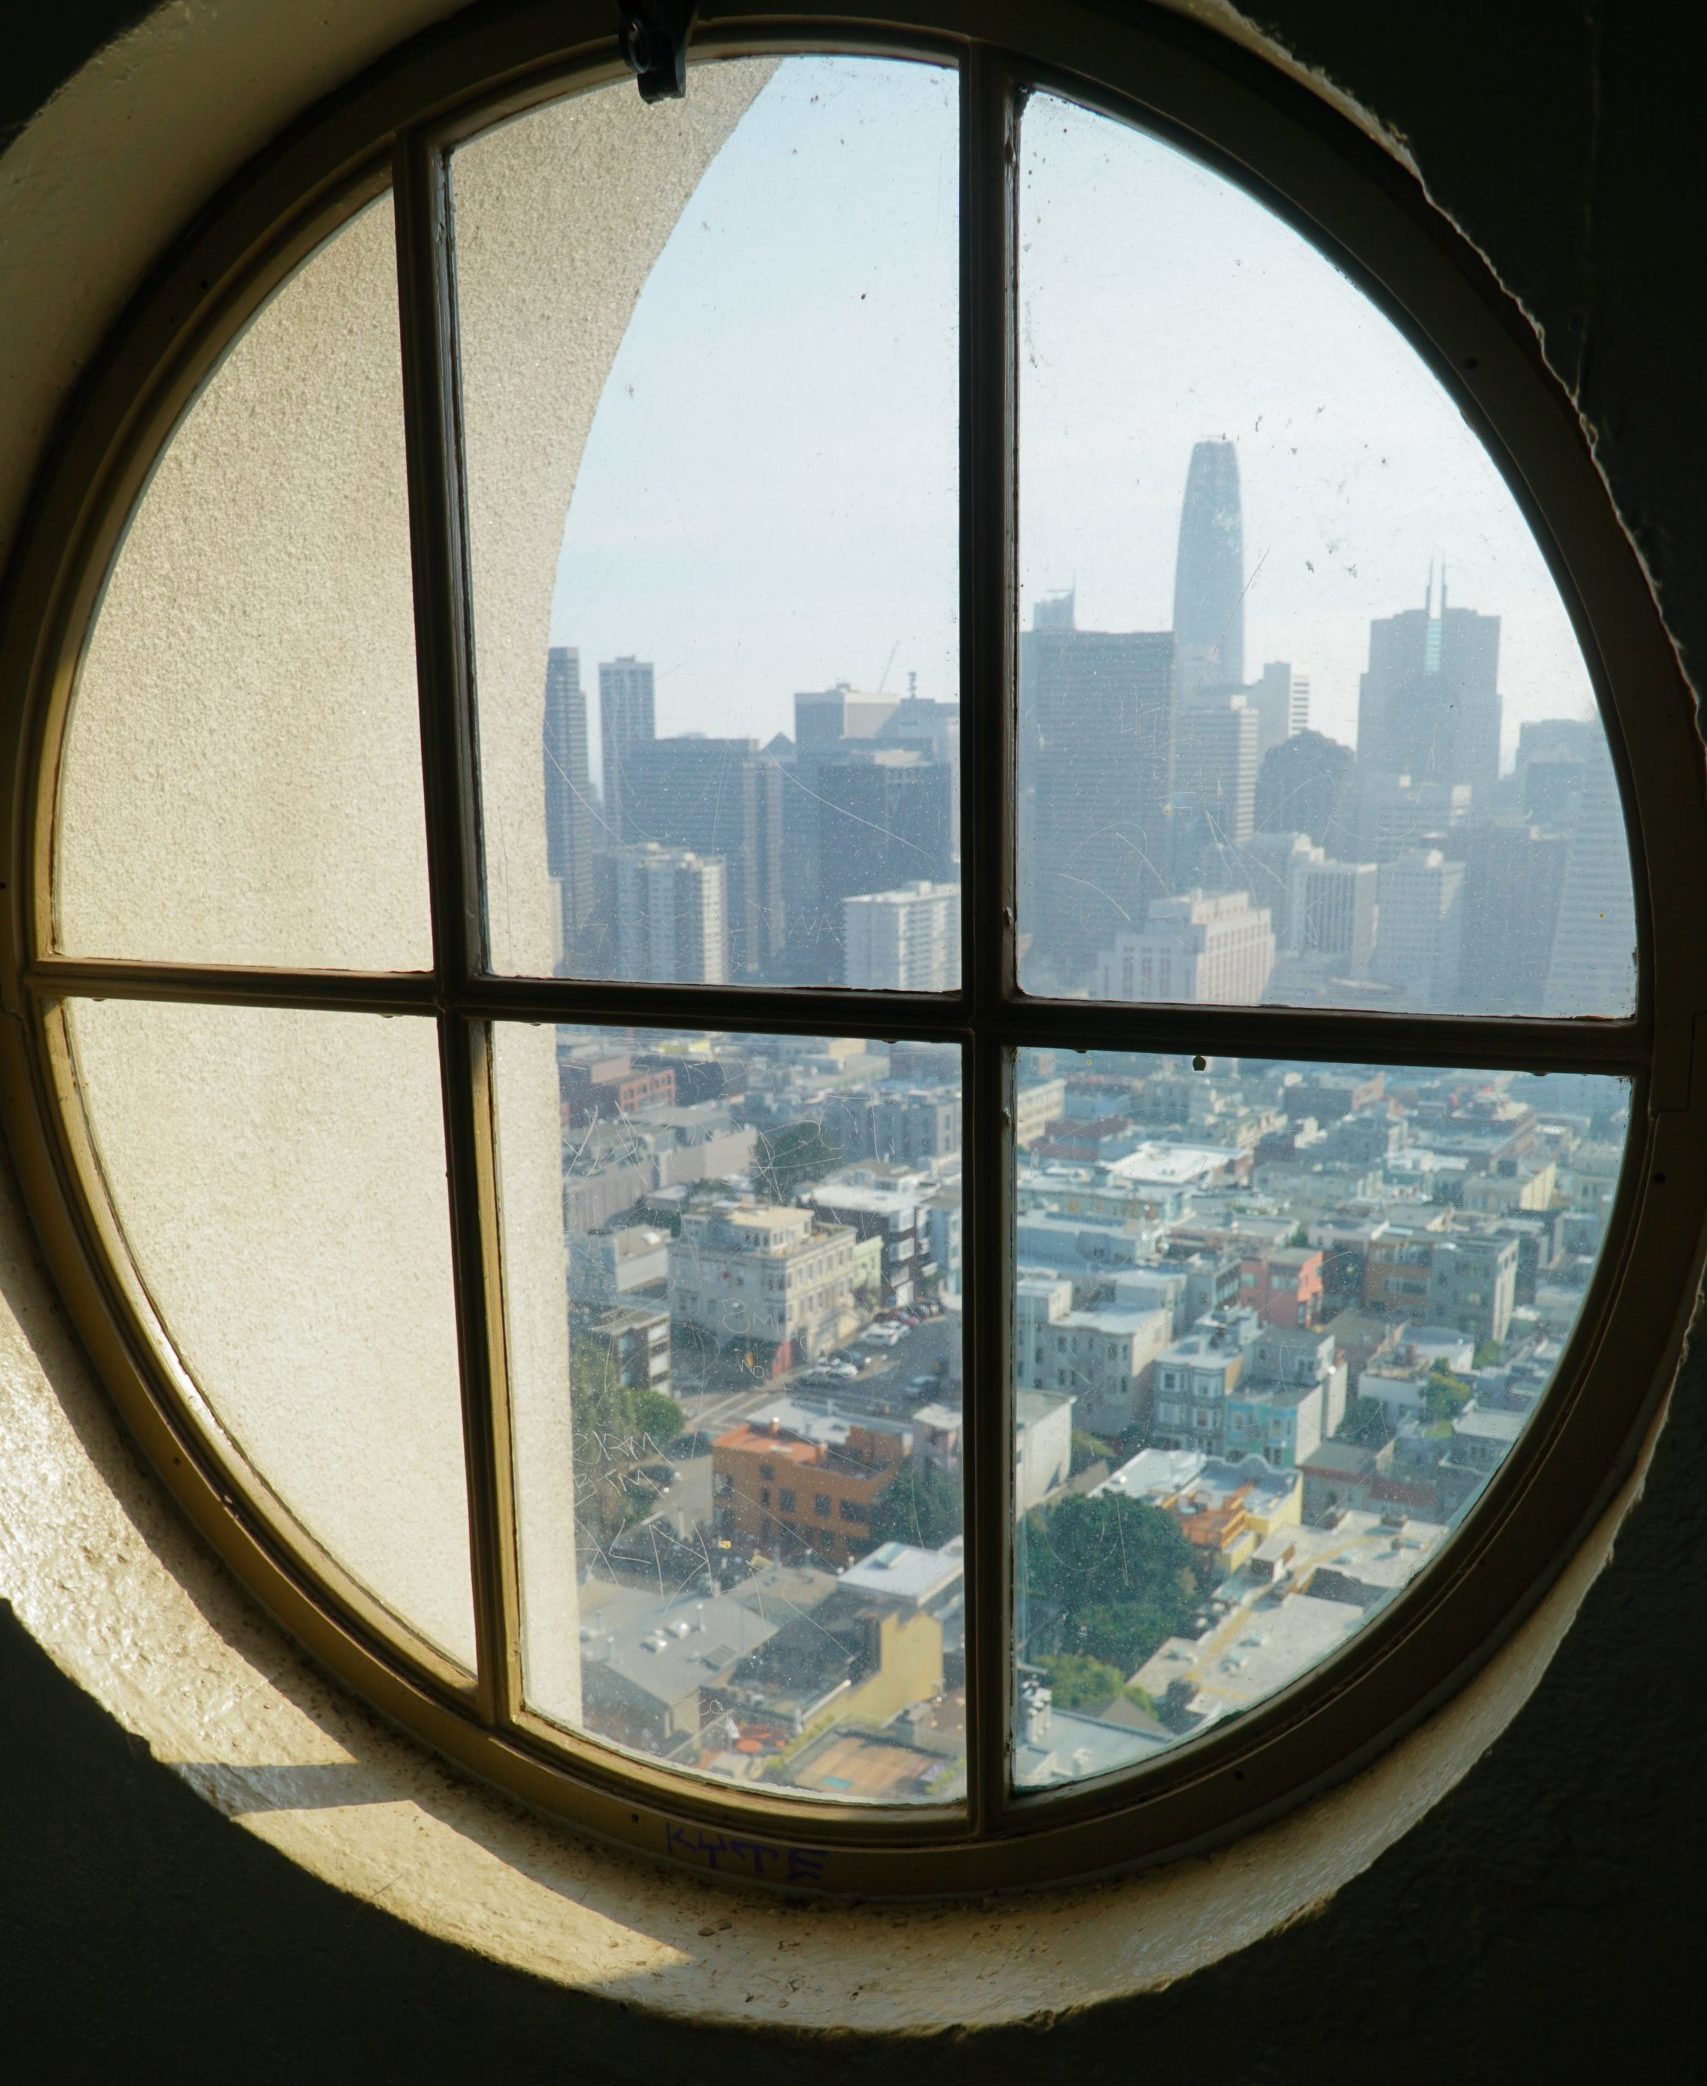 View from the top of Coit Tower through a circular window